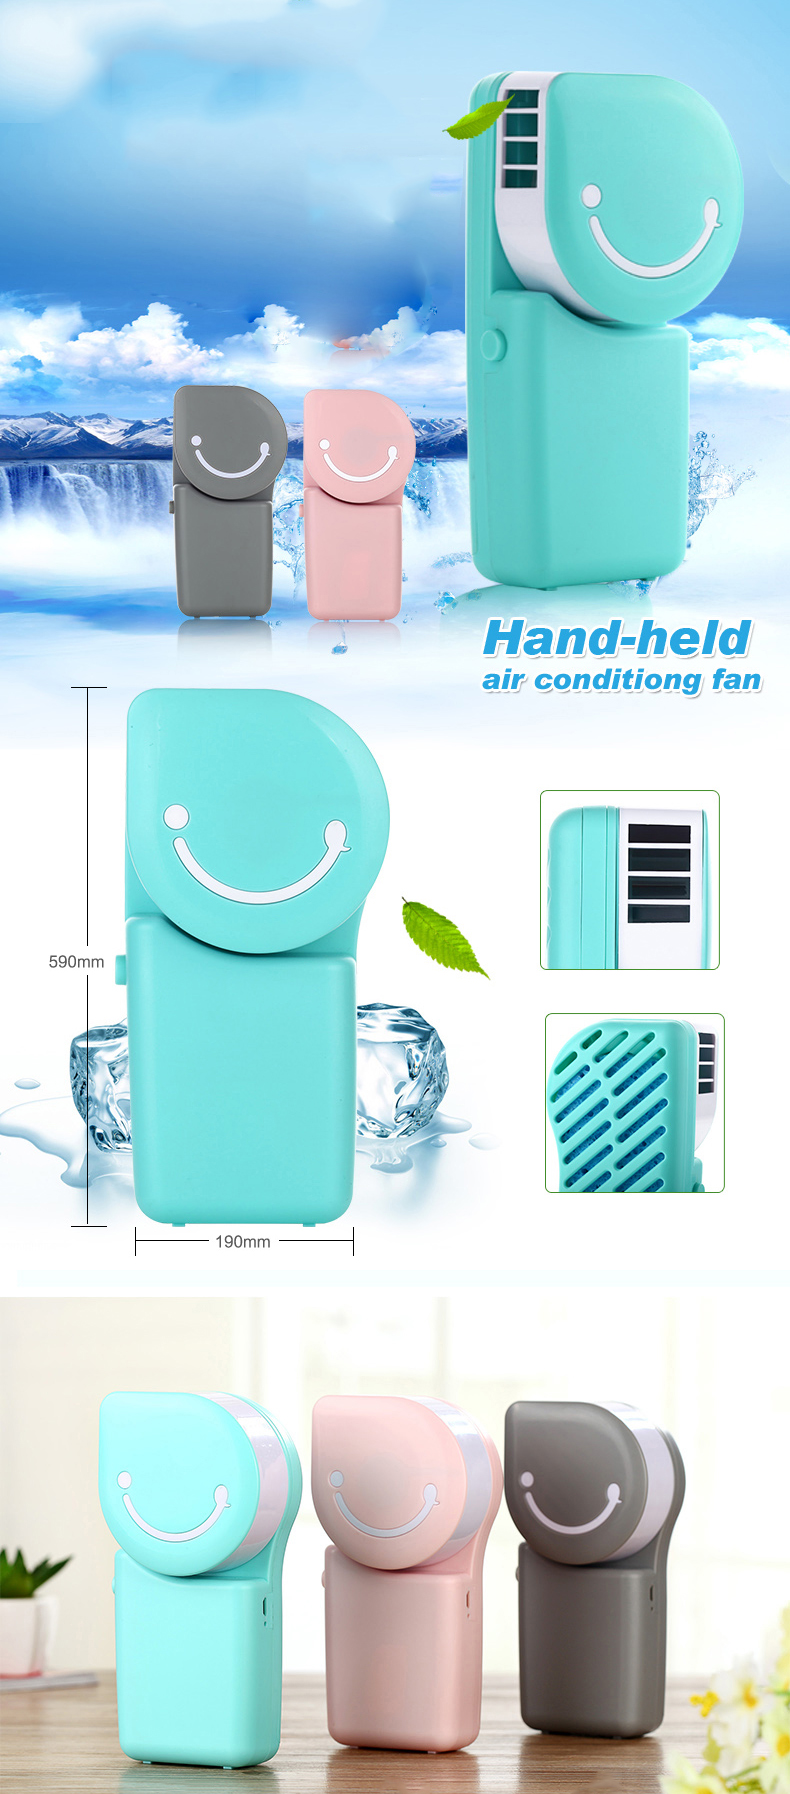 Loskii LX-882 Summer Mini Fan Cooling Portable Air Conditioning USB Charge Hand-held Cool Fan 79